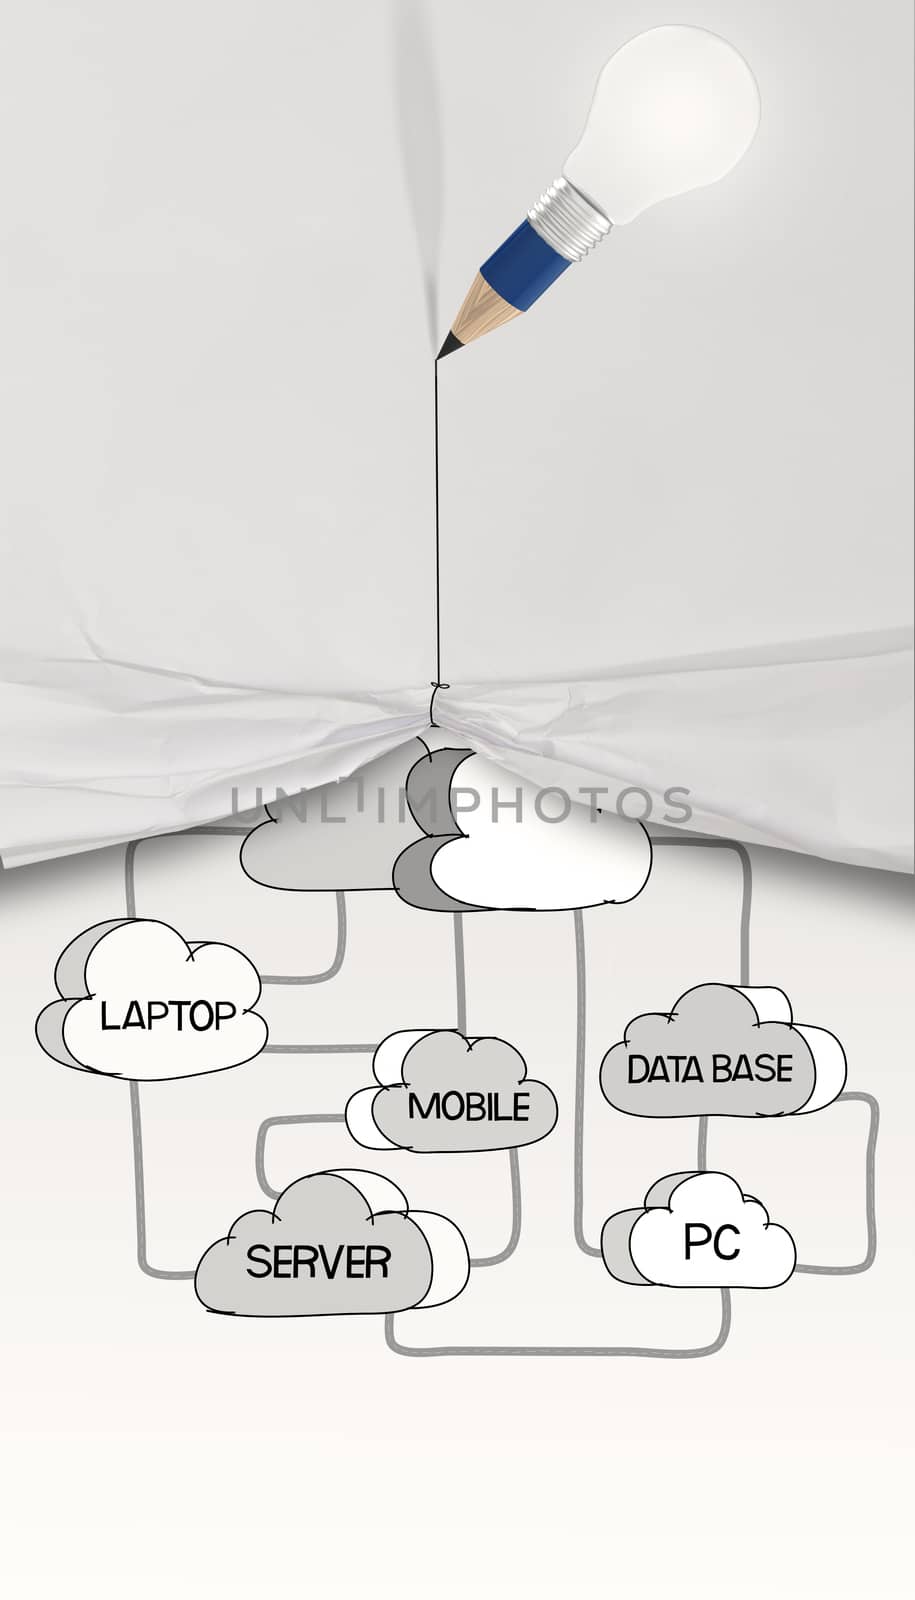 pencil lightbulb 3D draw rope open wrinkled paper show graphic cloud network diagram as concept